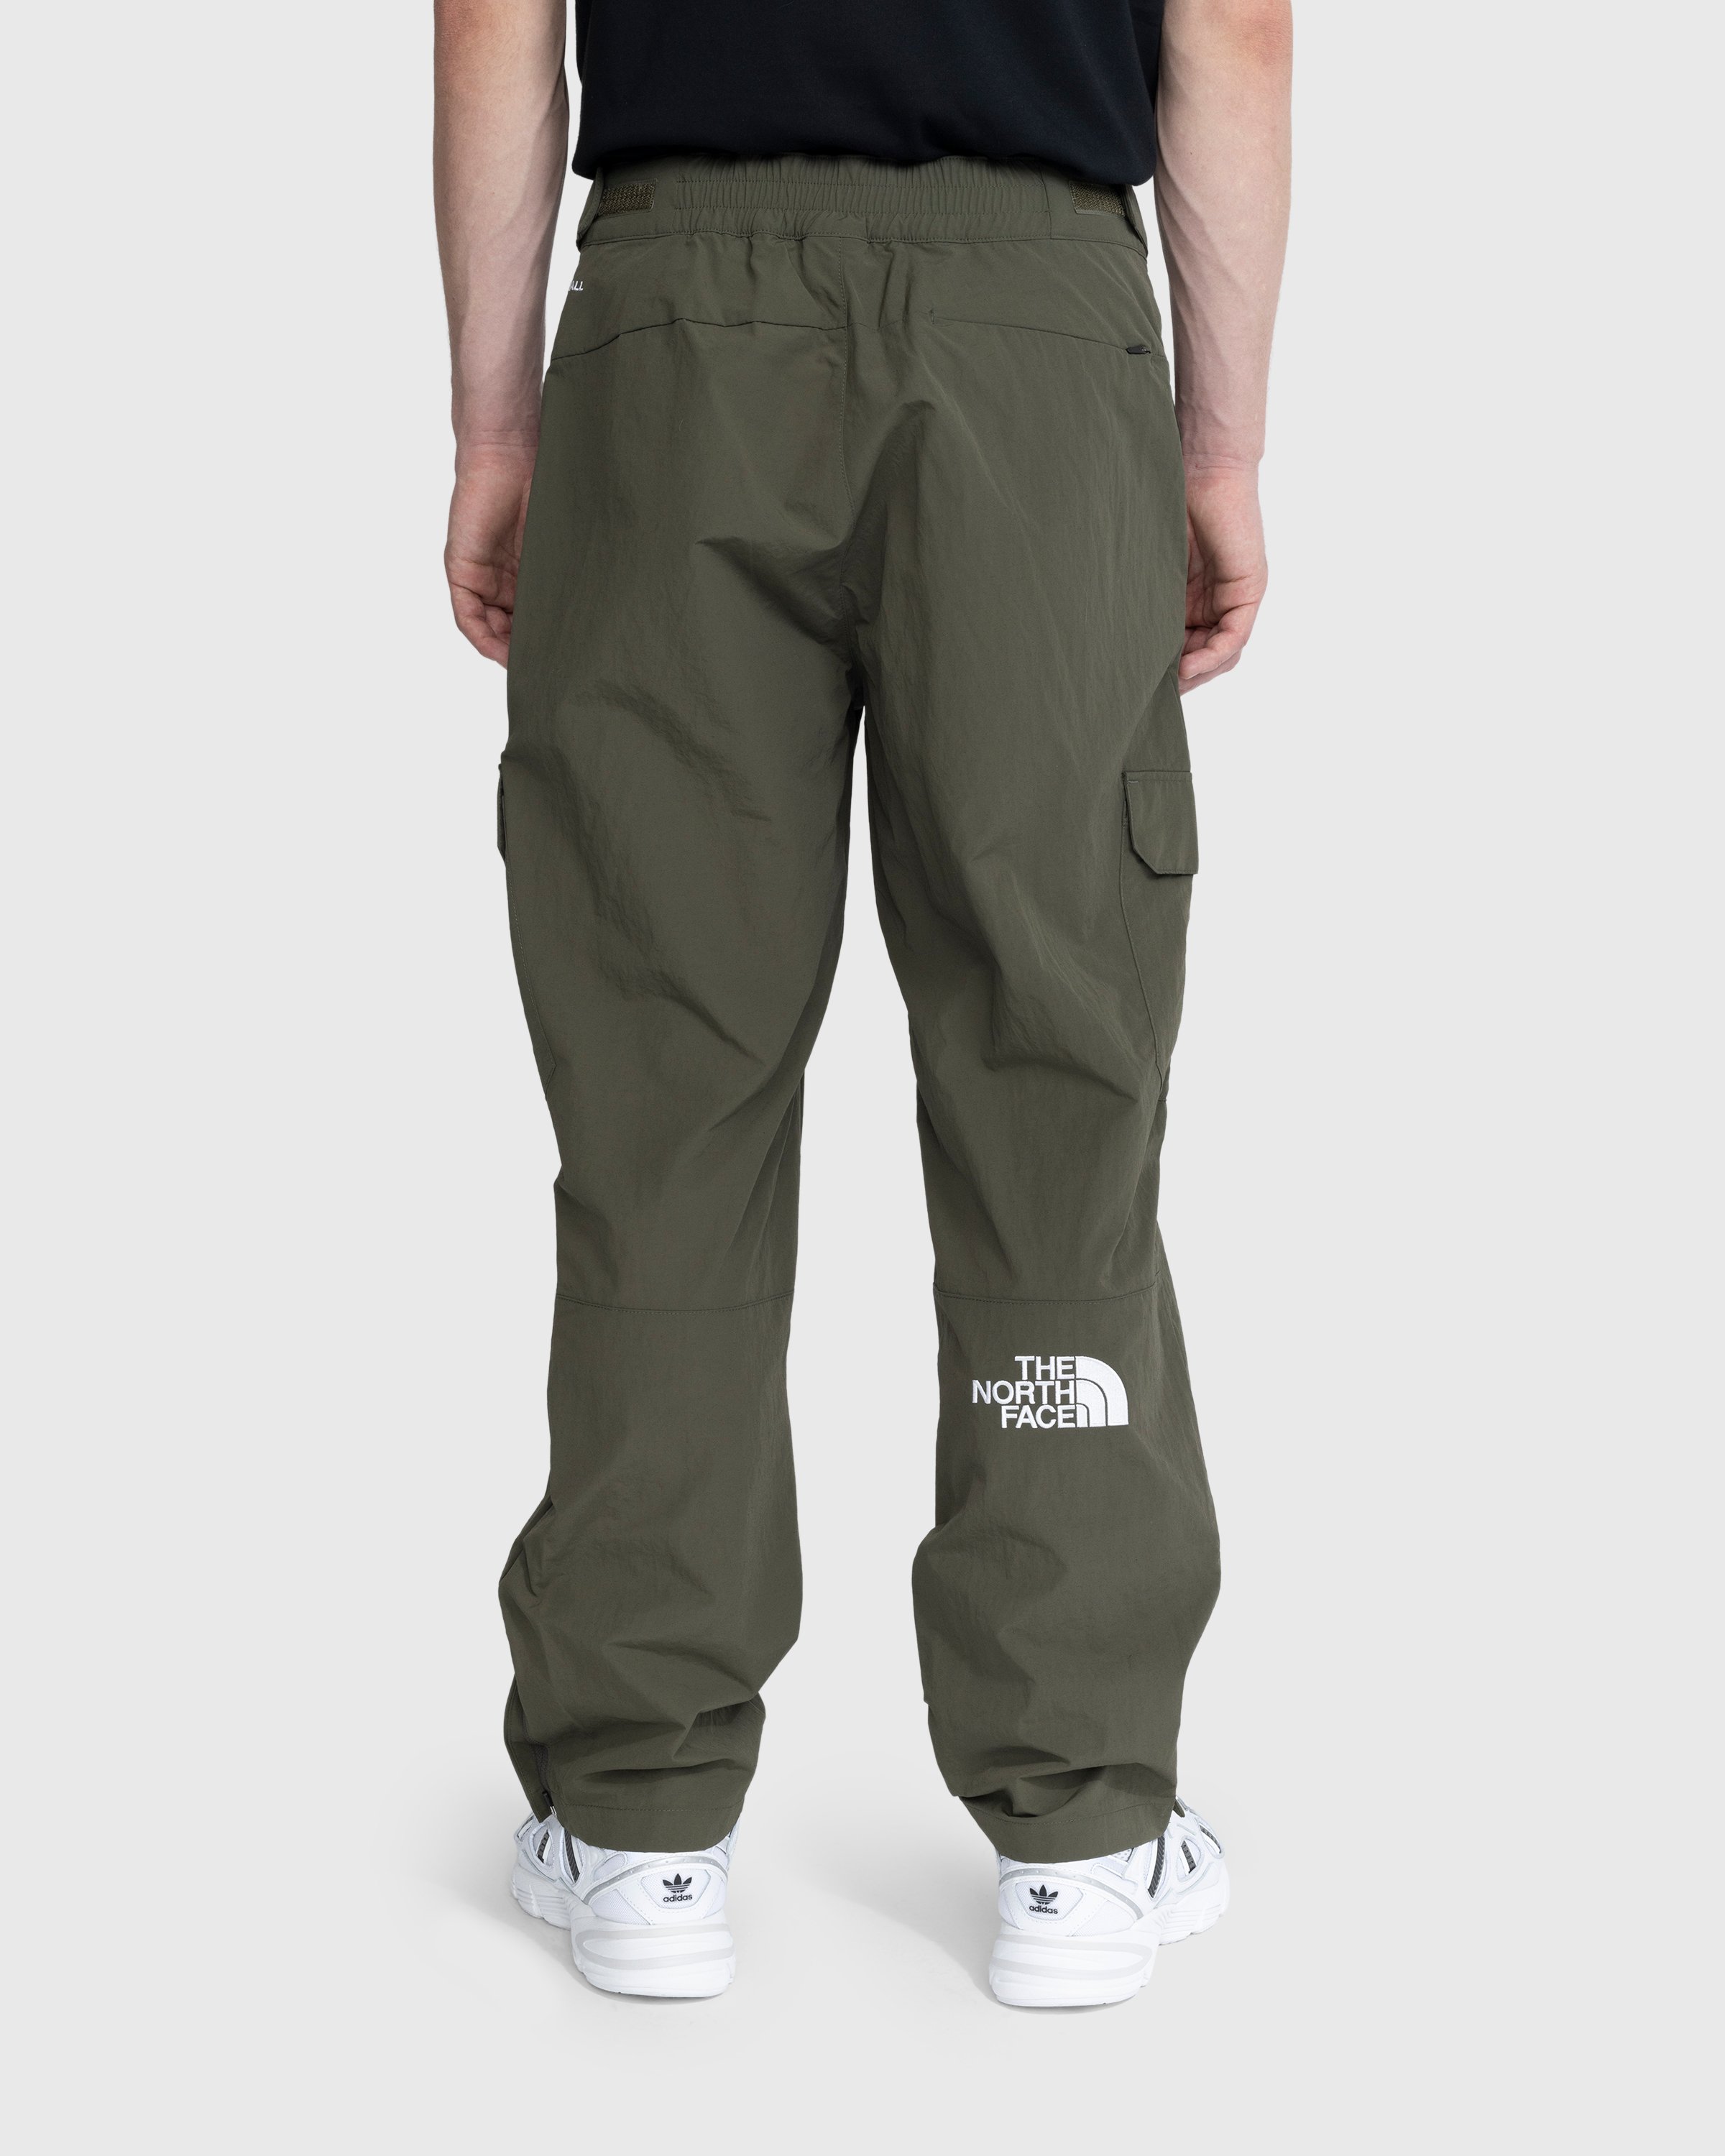 The North Face - ‘78 Low-Fi Hi-Tek Cargo Pant New Taupe Green - Clothing - Green - Image 4